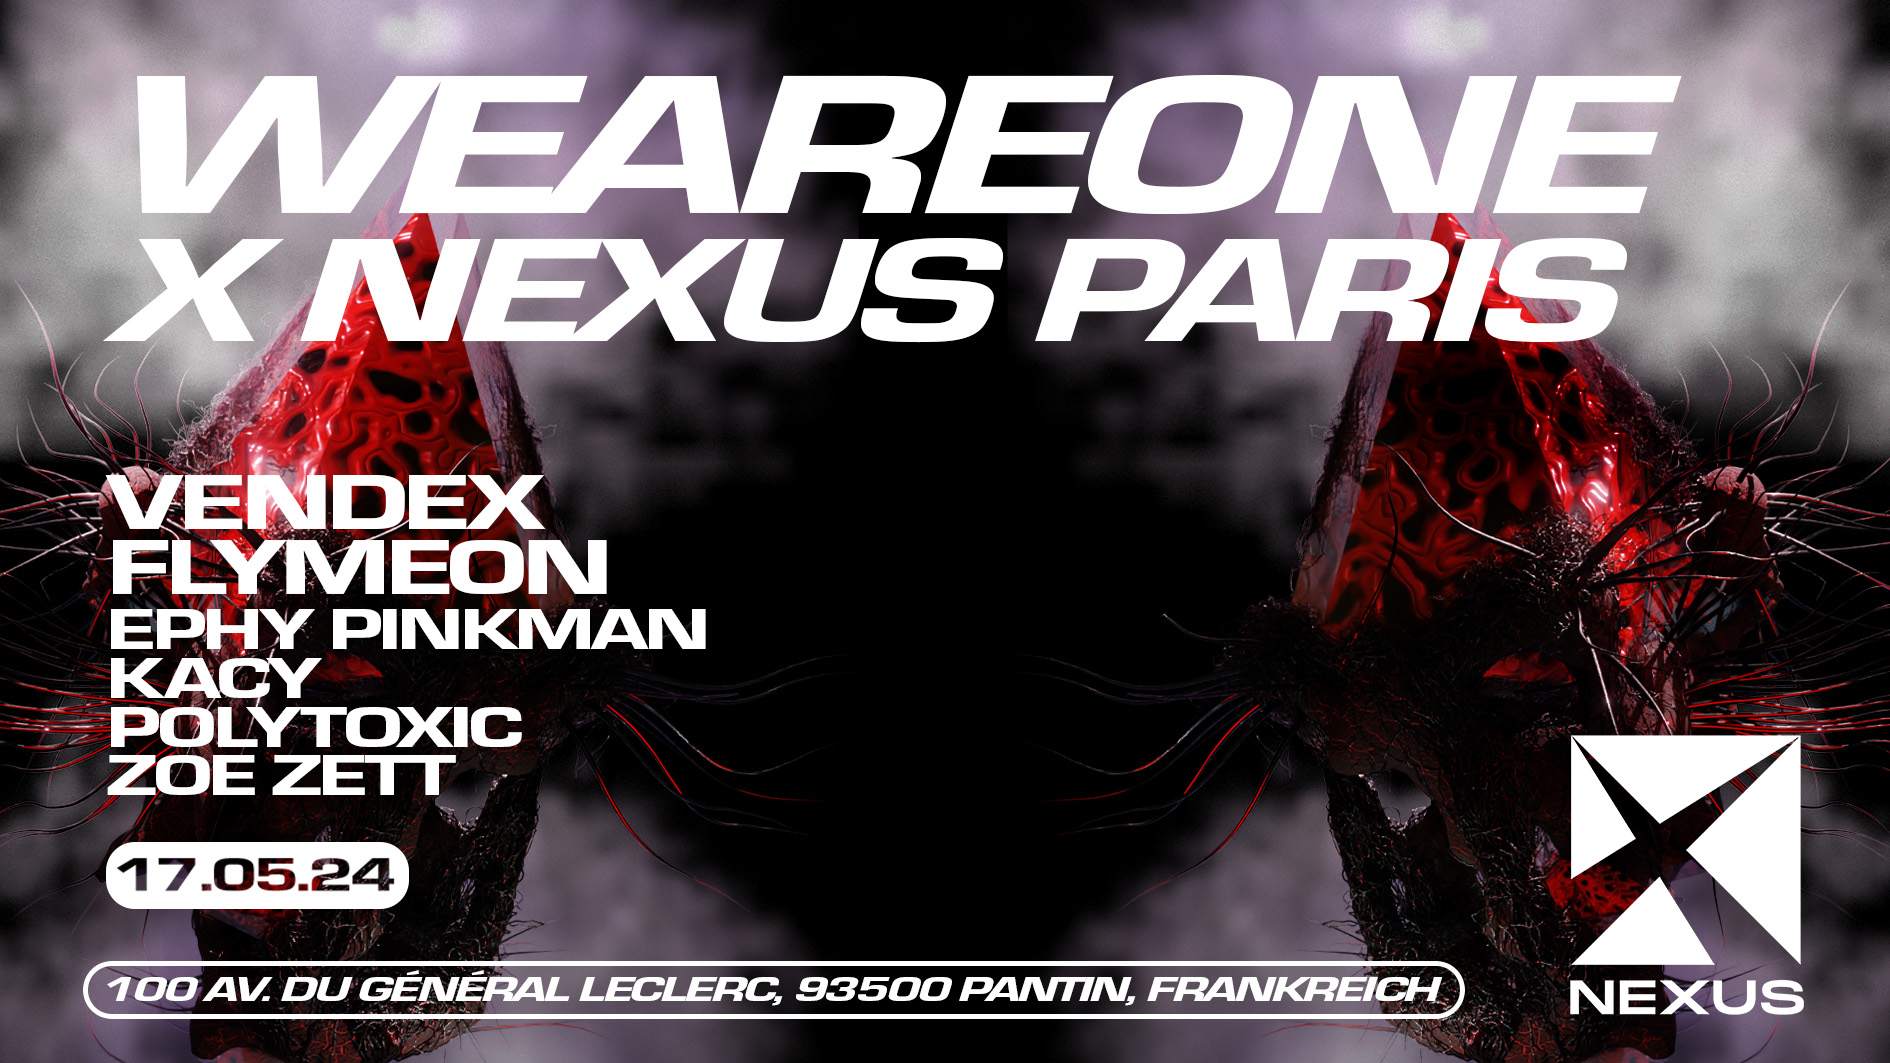 WE ARE ONE x Nexus with Vendex, Flymeon and many more - Página frontal